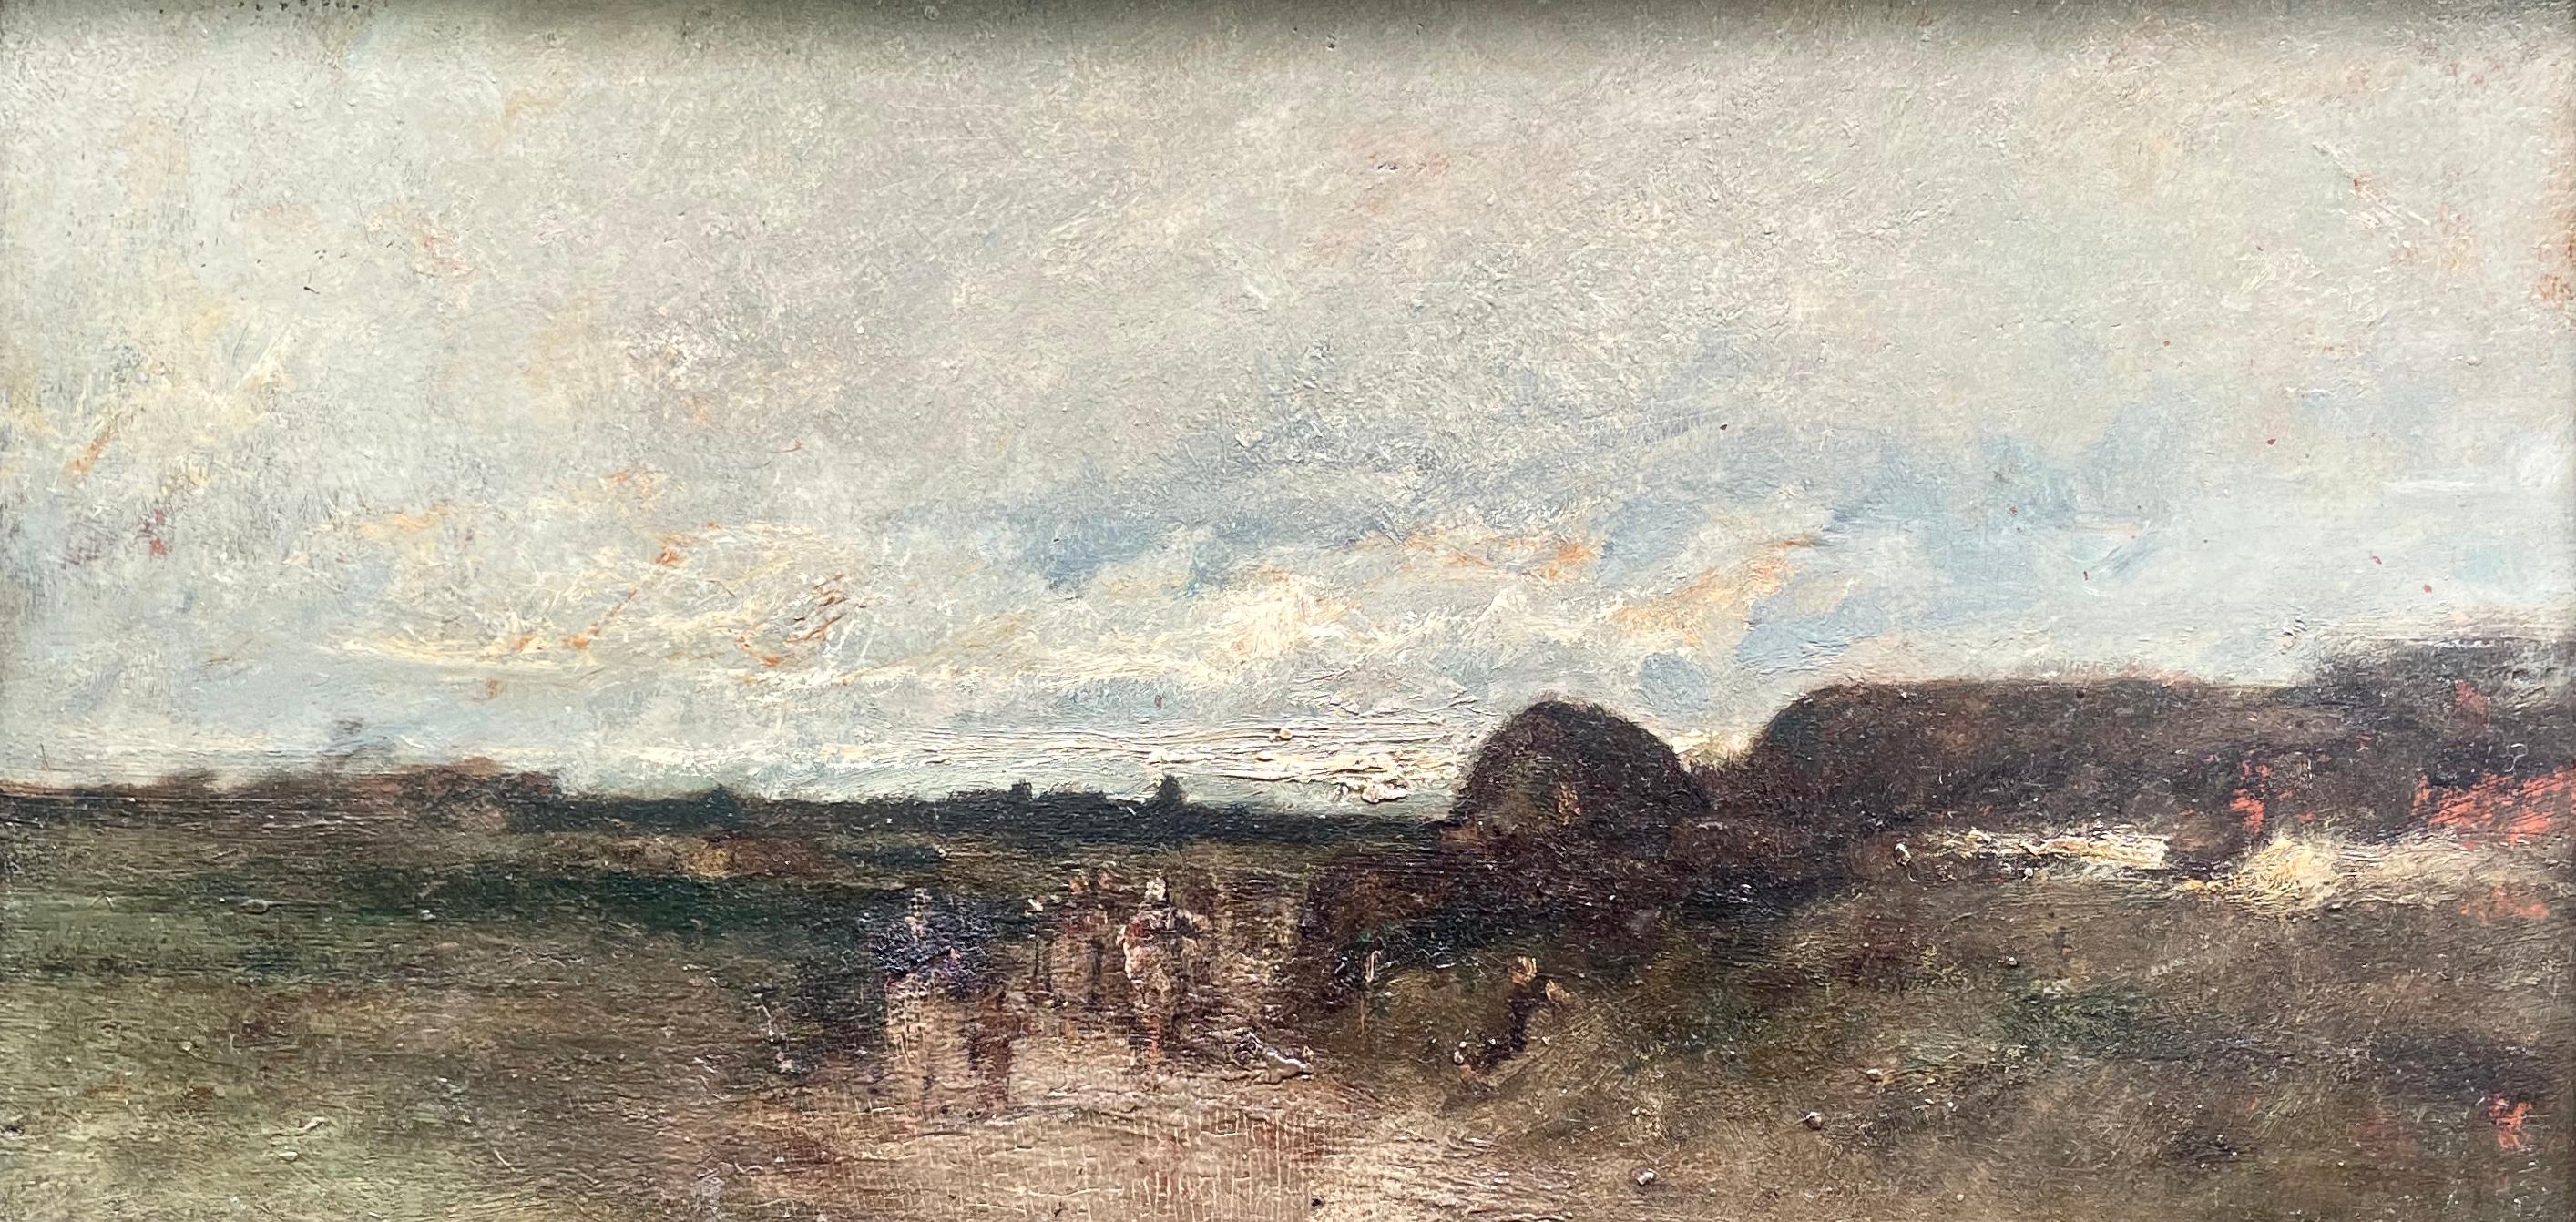 Eugene Isabey (1803-1886) Coastal Scene. Signed. Between Romanticism and Impressionism and influenced by Delacroix and Gericault, Isabey spent much time on the Normandy coast sketching and painting. This softly hued and brooding autumnal oil